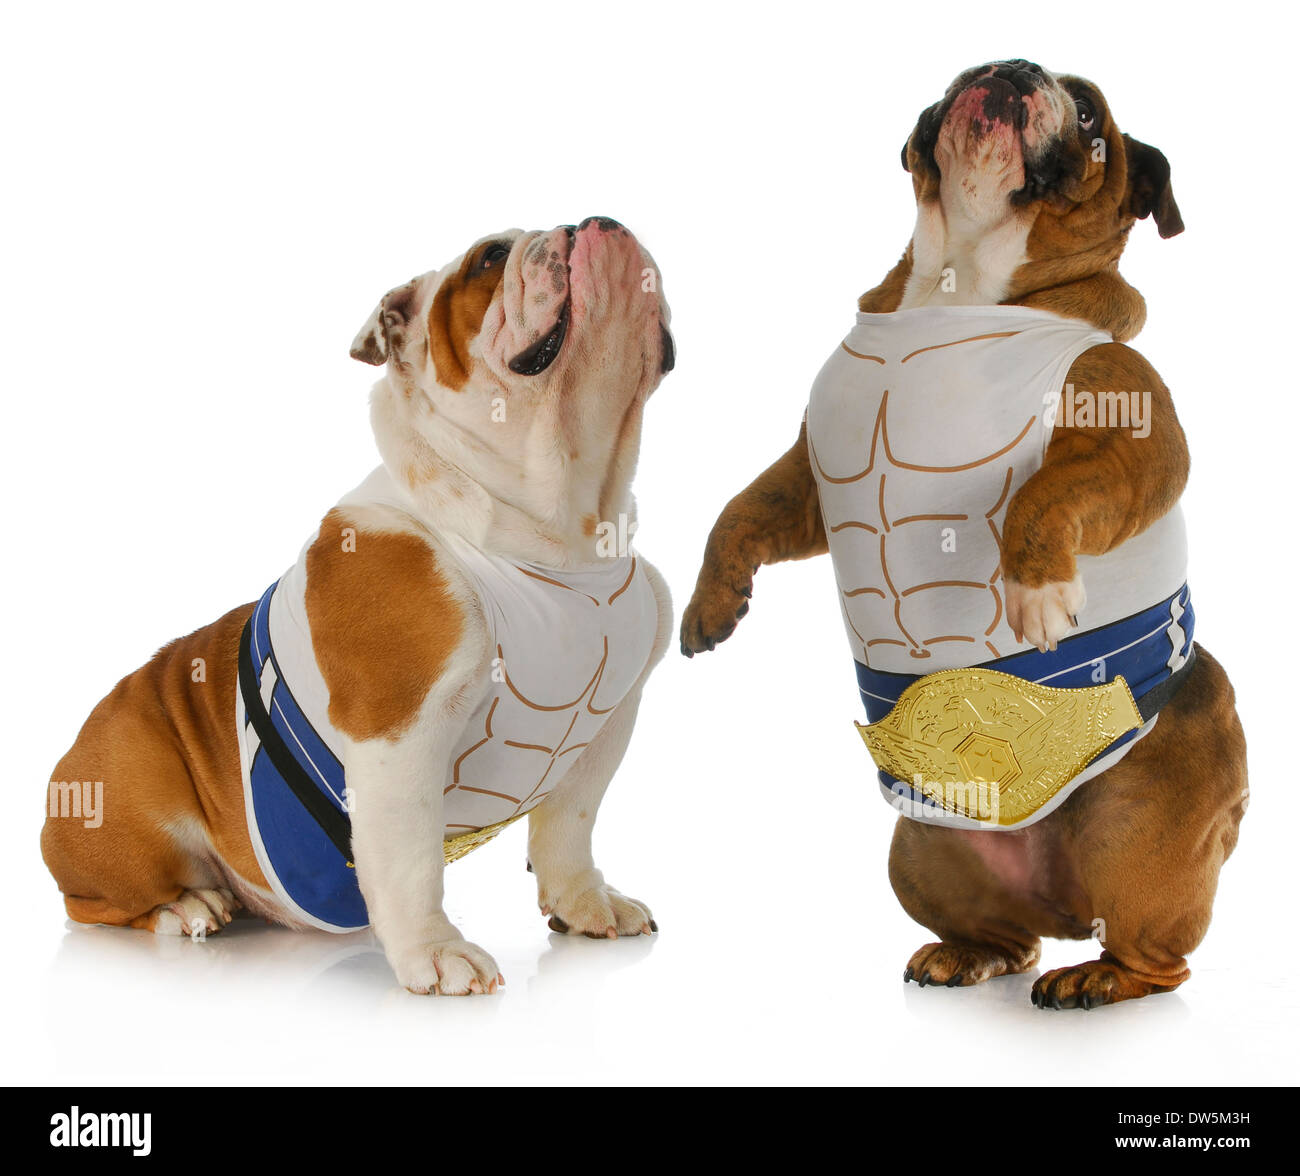 Are English Bulldogs Strong Dogs